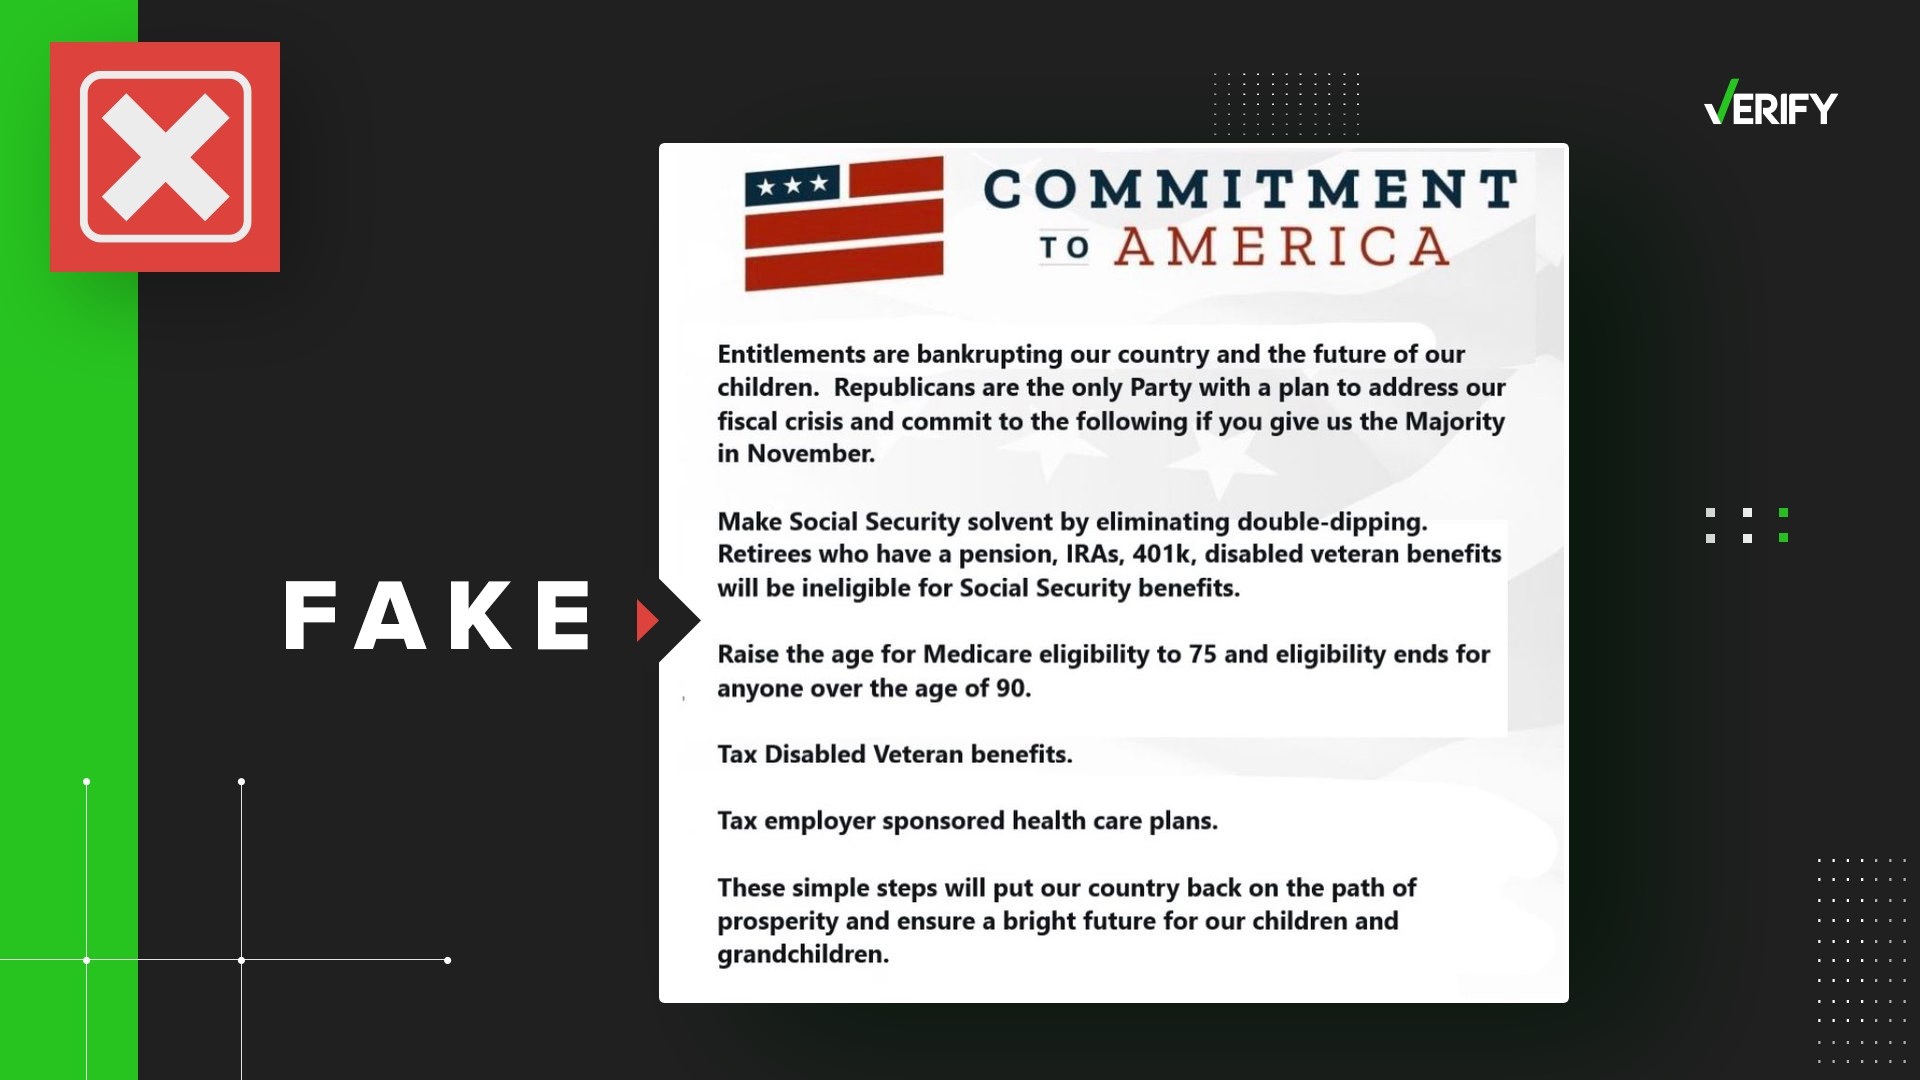 Social media posts falsely claim the House GOP’s Commitment to America plan specifies cuts to Medicare and Social Security benefits for some groups.